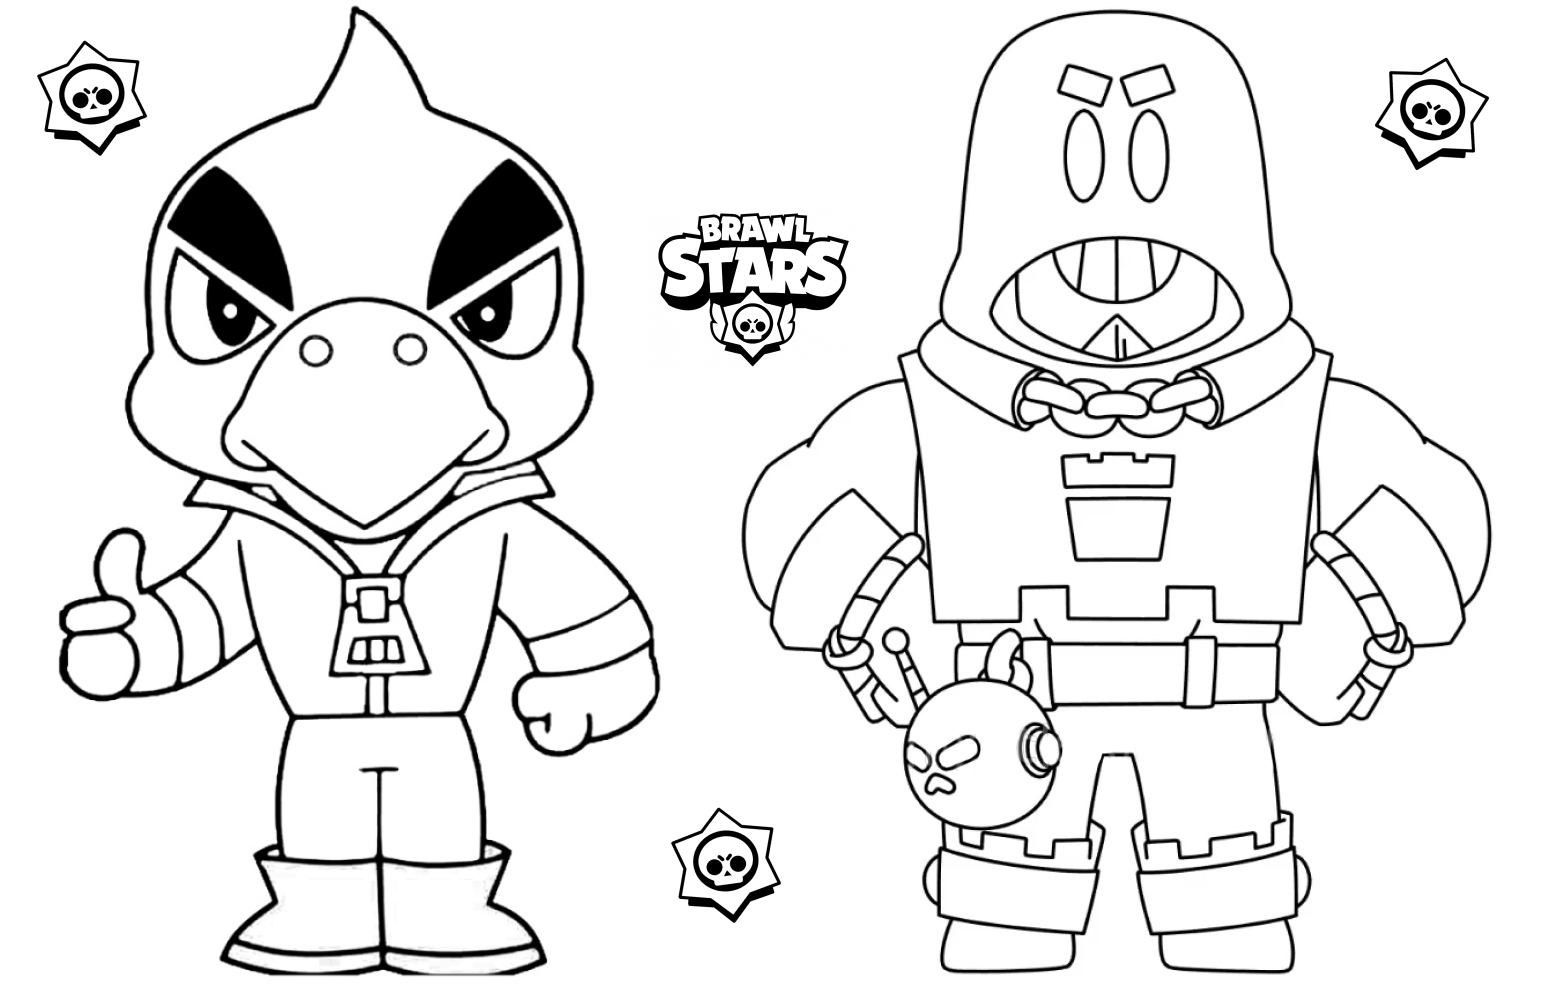 Coloring page Crow Brawl Stars and Grom